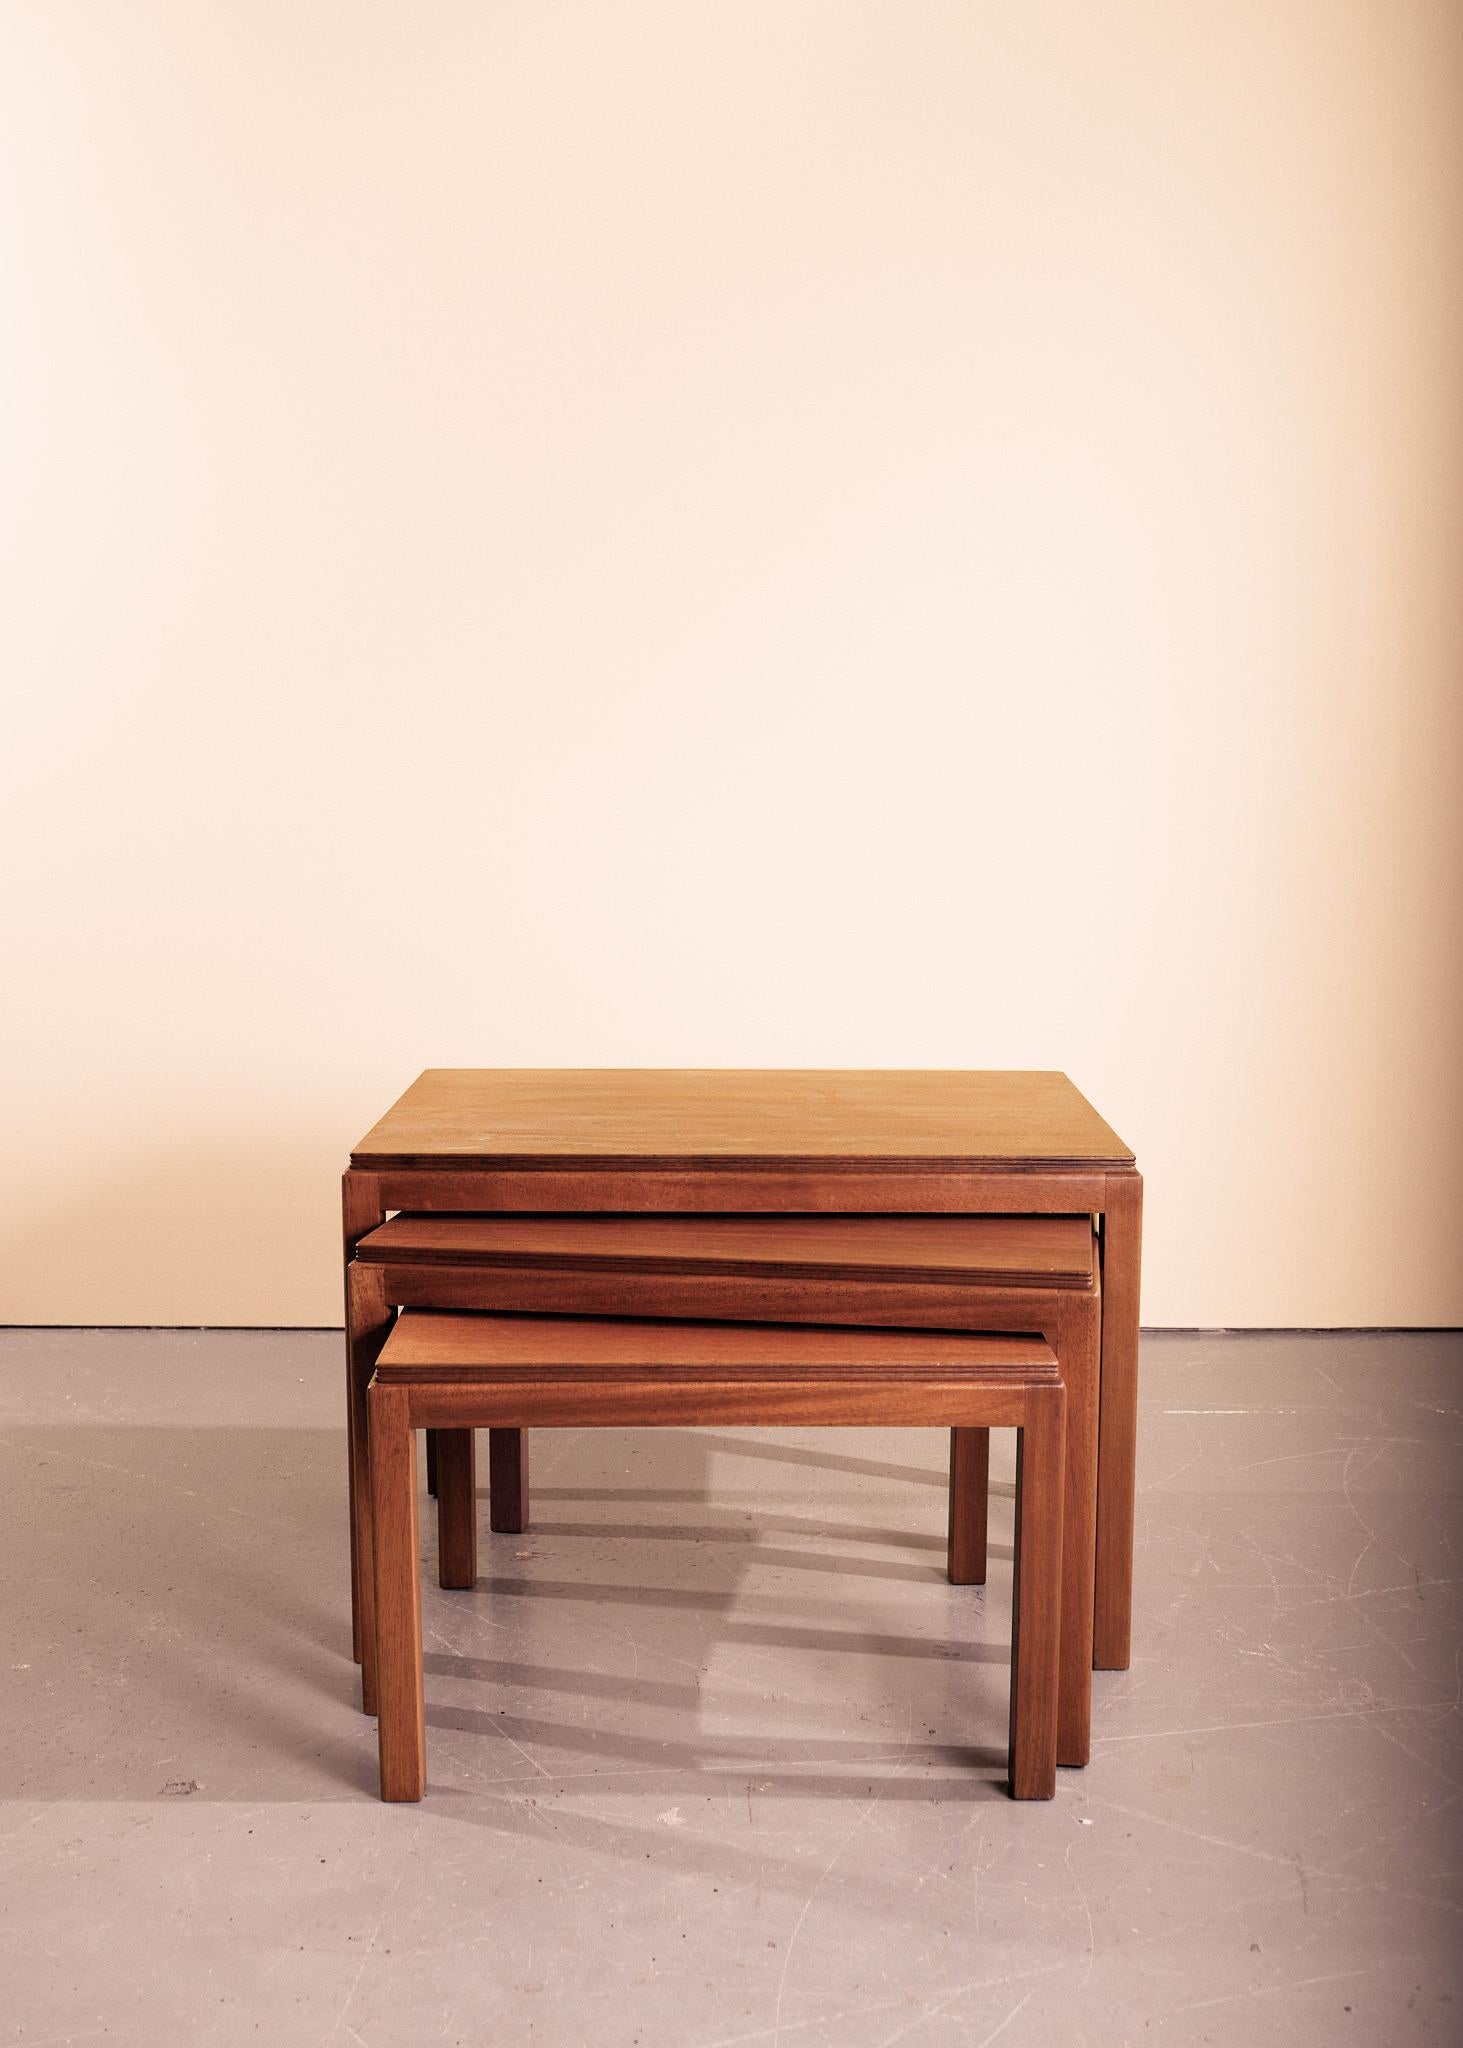 A nest of three walnut tables by Gordon Russell. Simple in form with an inset, reeded edge and rounded legs. Minimal restoration, just a light polish, these tables are in excellent condition, with makers plate label ‘Gordon Russell Limited, Broadway